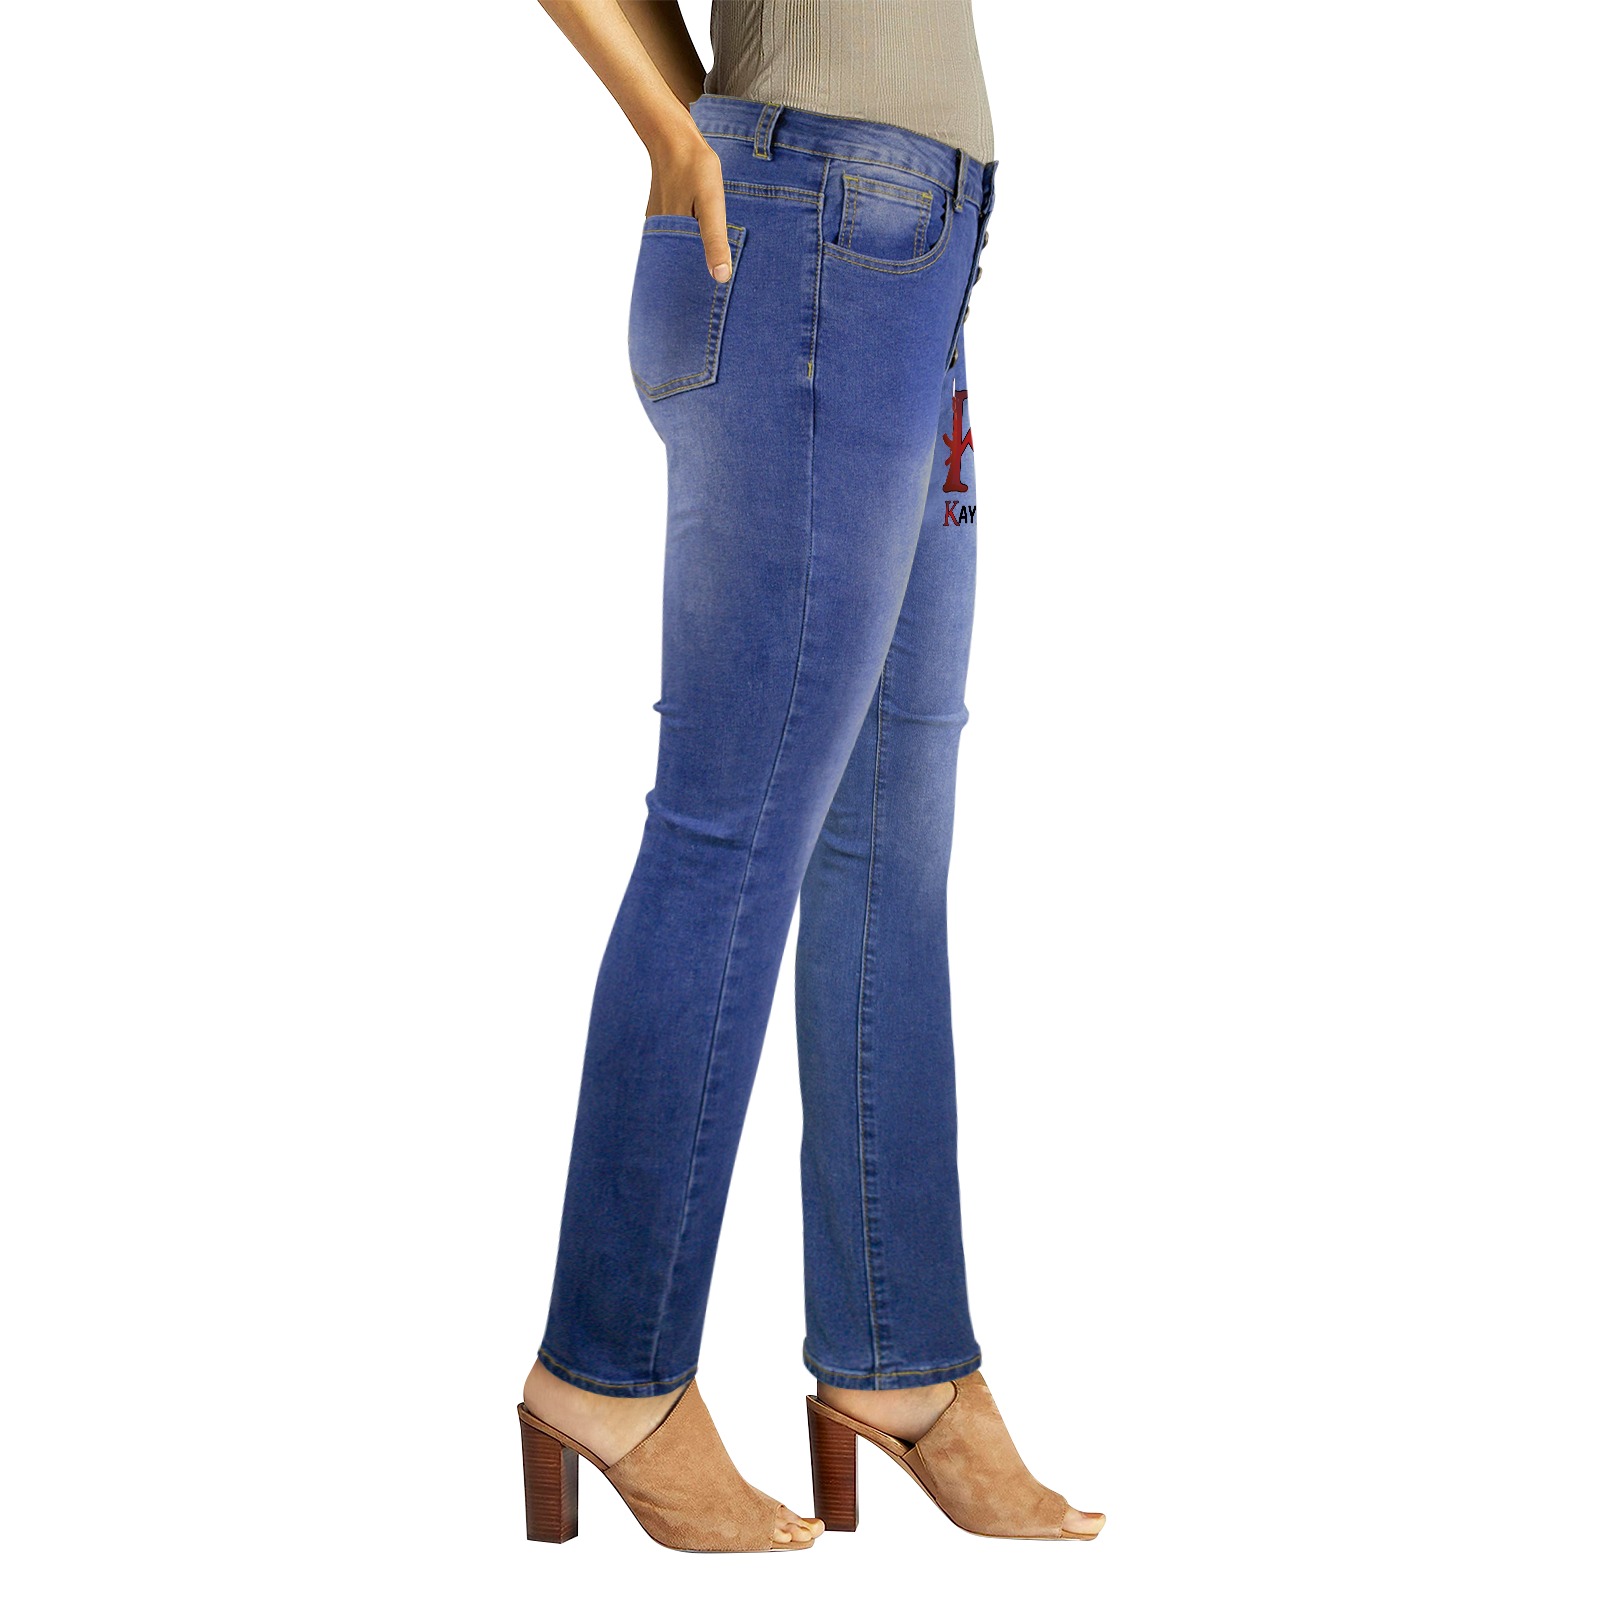 Kay Rose Women's Jeans (Front&Back Printing)